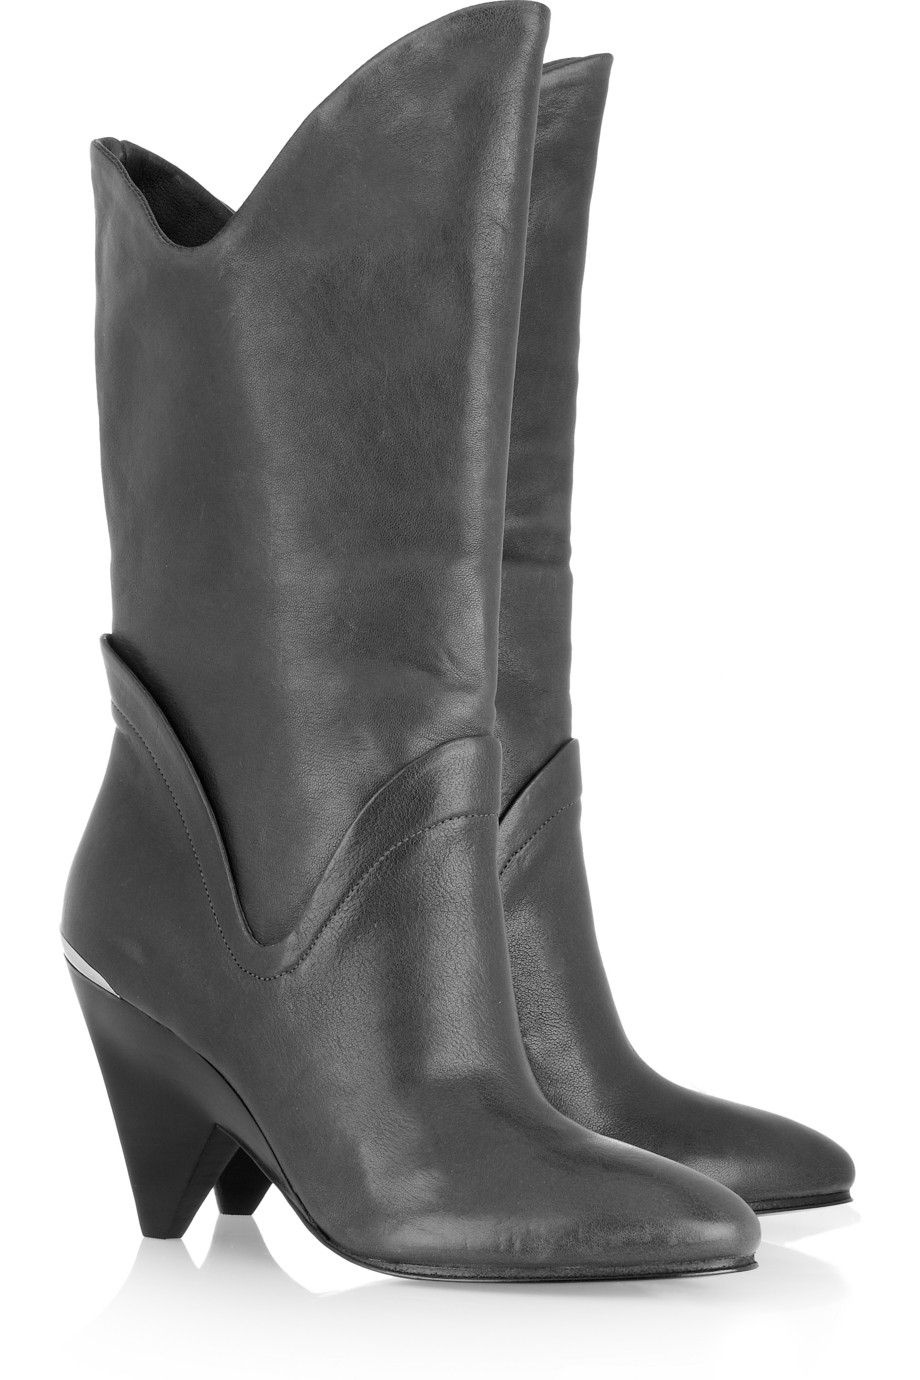 Fold-over leather calf boots by Belle Sigerson Morrison